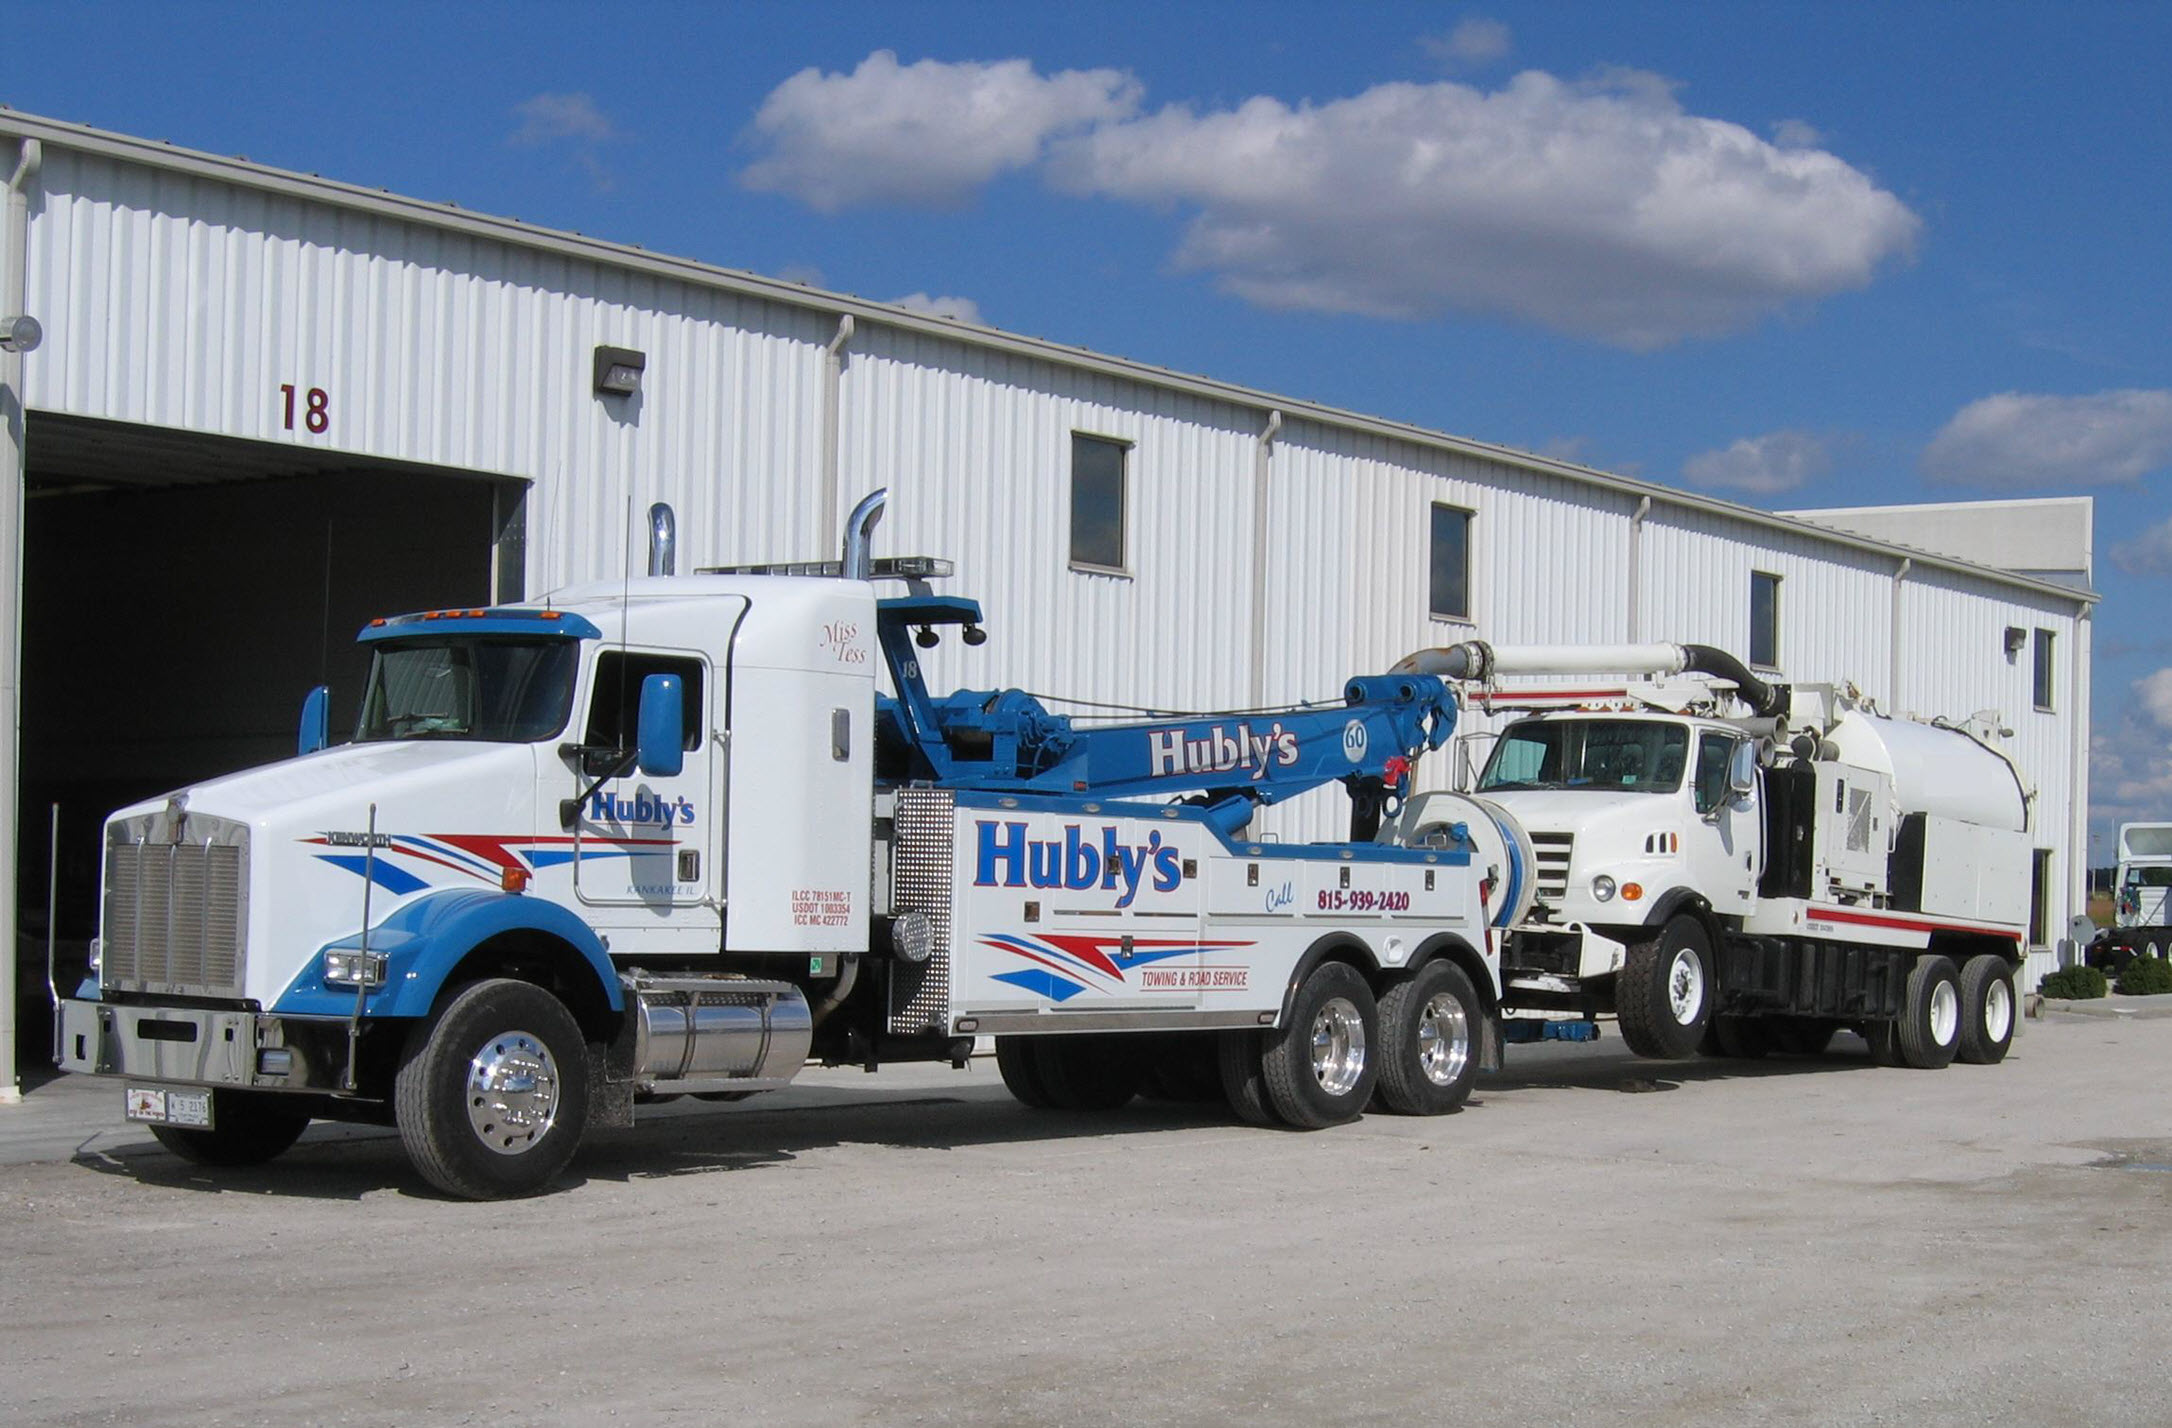 Hubly's Towing